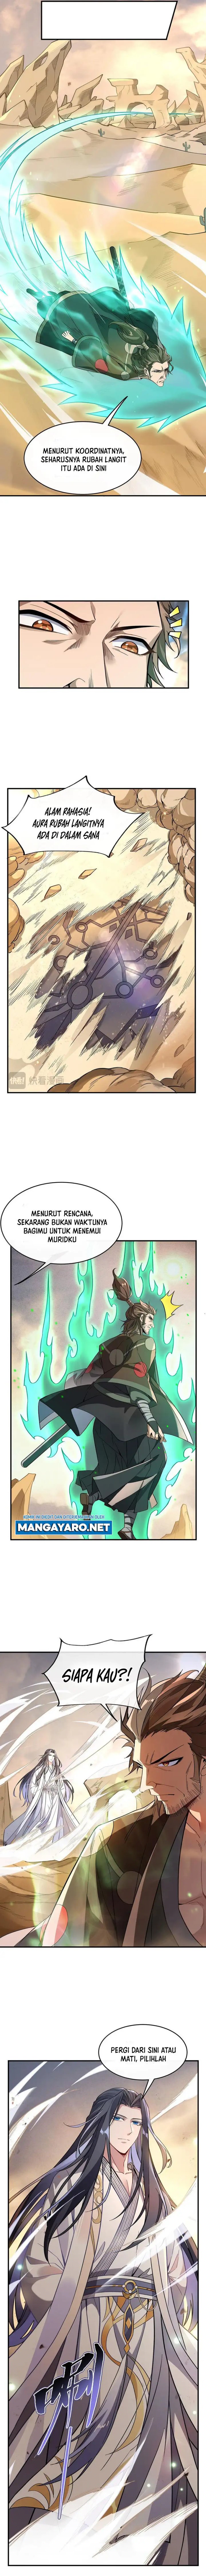 Dilarang COPAS - situs resmi www.mangacanblog.com - Komik my female apprentices are all big shots from the future 224 - chapter 224 225 Indonesia my female apprentices are all big shots from the future 224 - chapter 224 Terbaru 8|Baca Manga Komik Indonesia|Mangacan